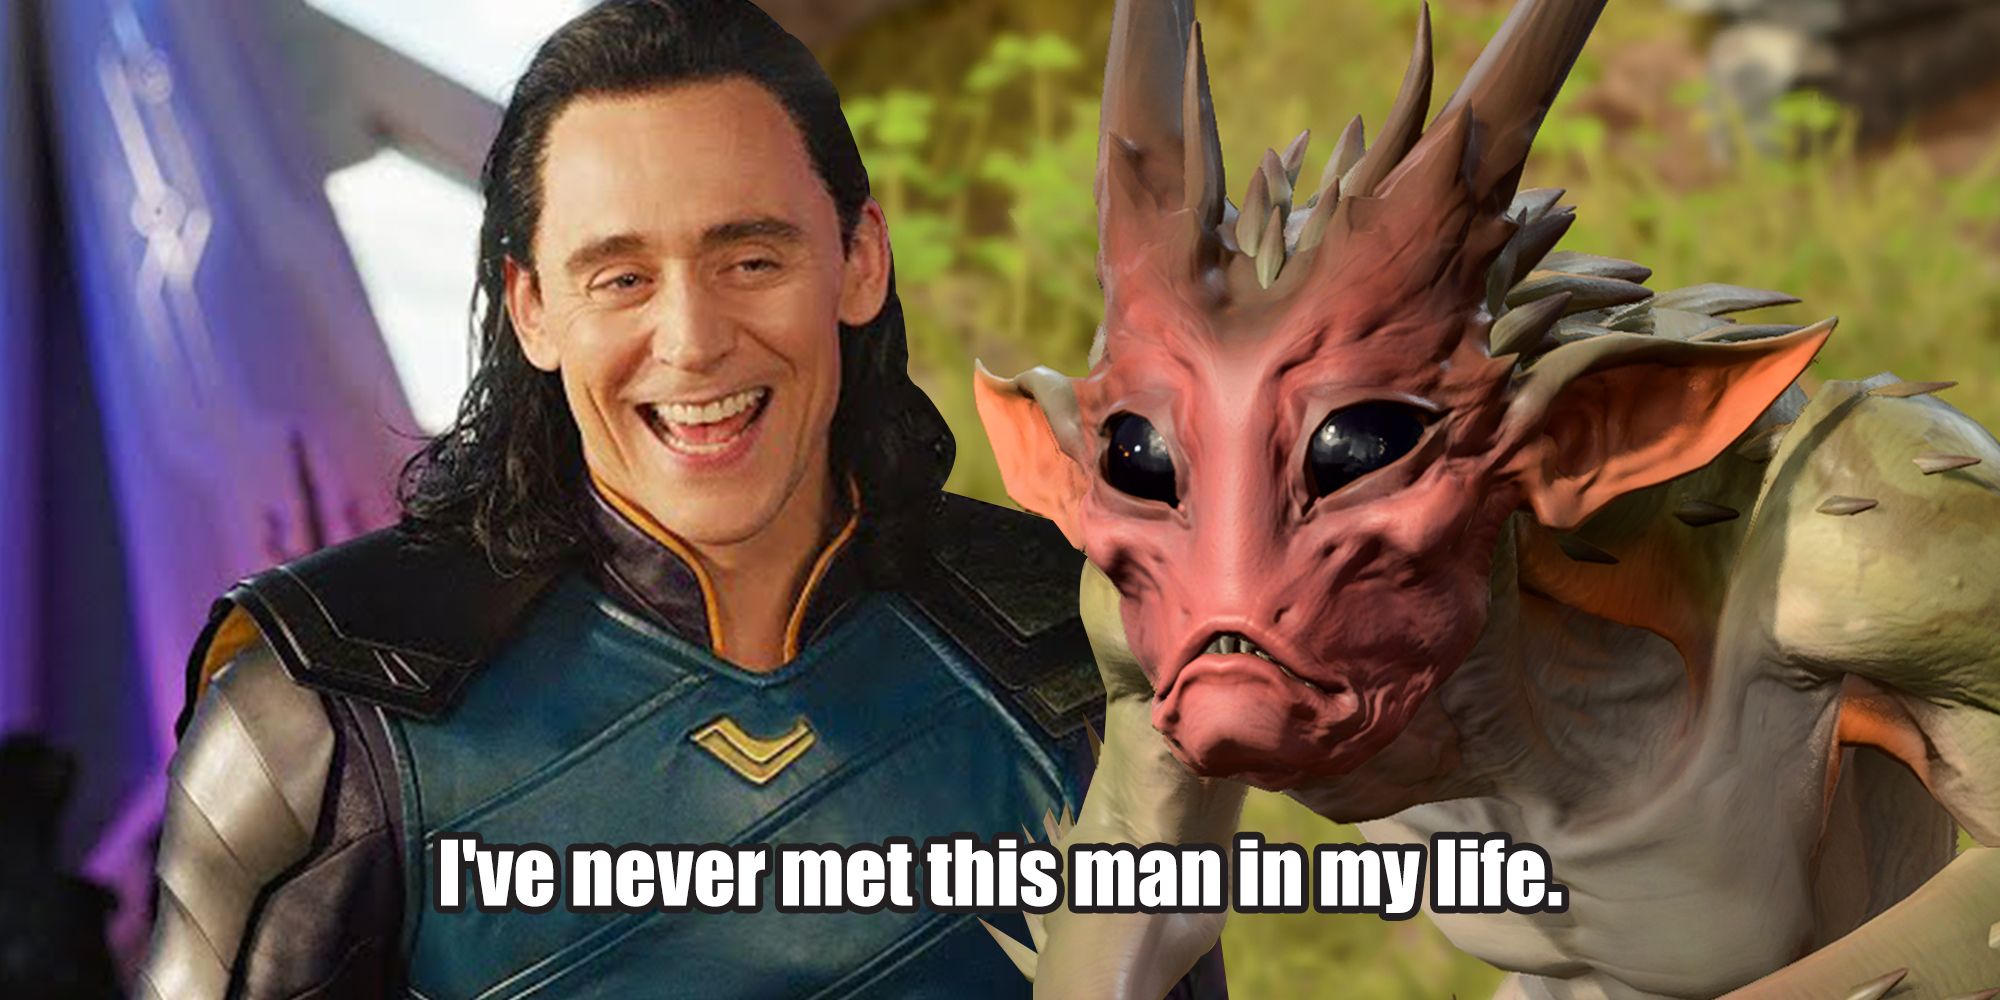 Loki saying 'I've never met this man in my life' to Shovel